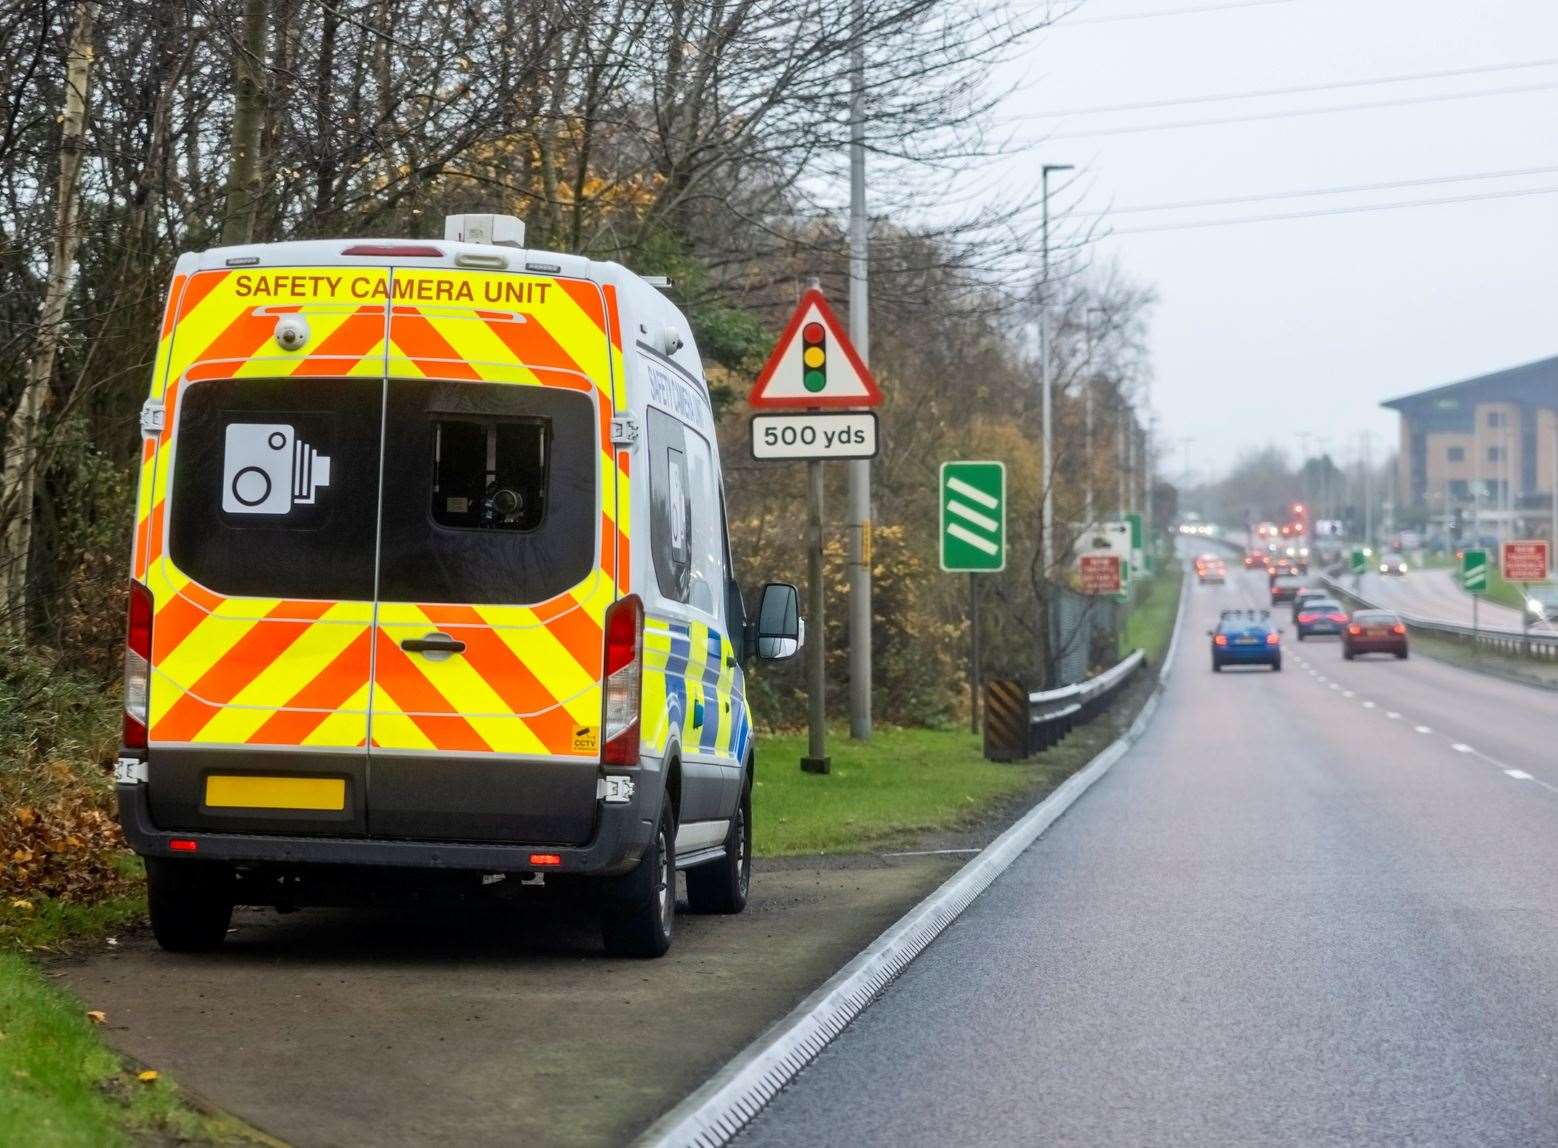 A mobile radar speed check taking place at the side of the road. Image: Stock photo.